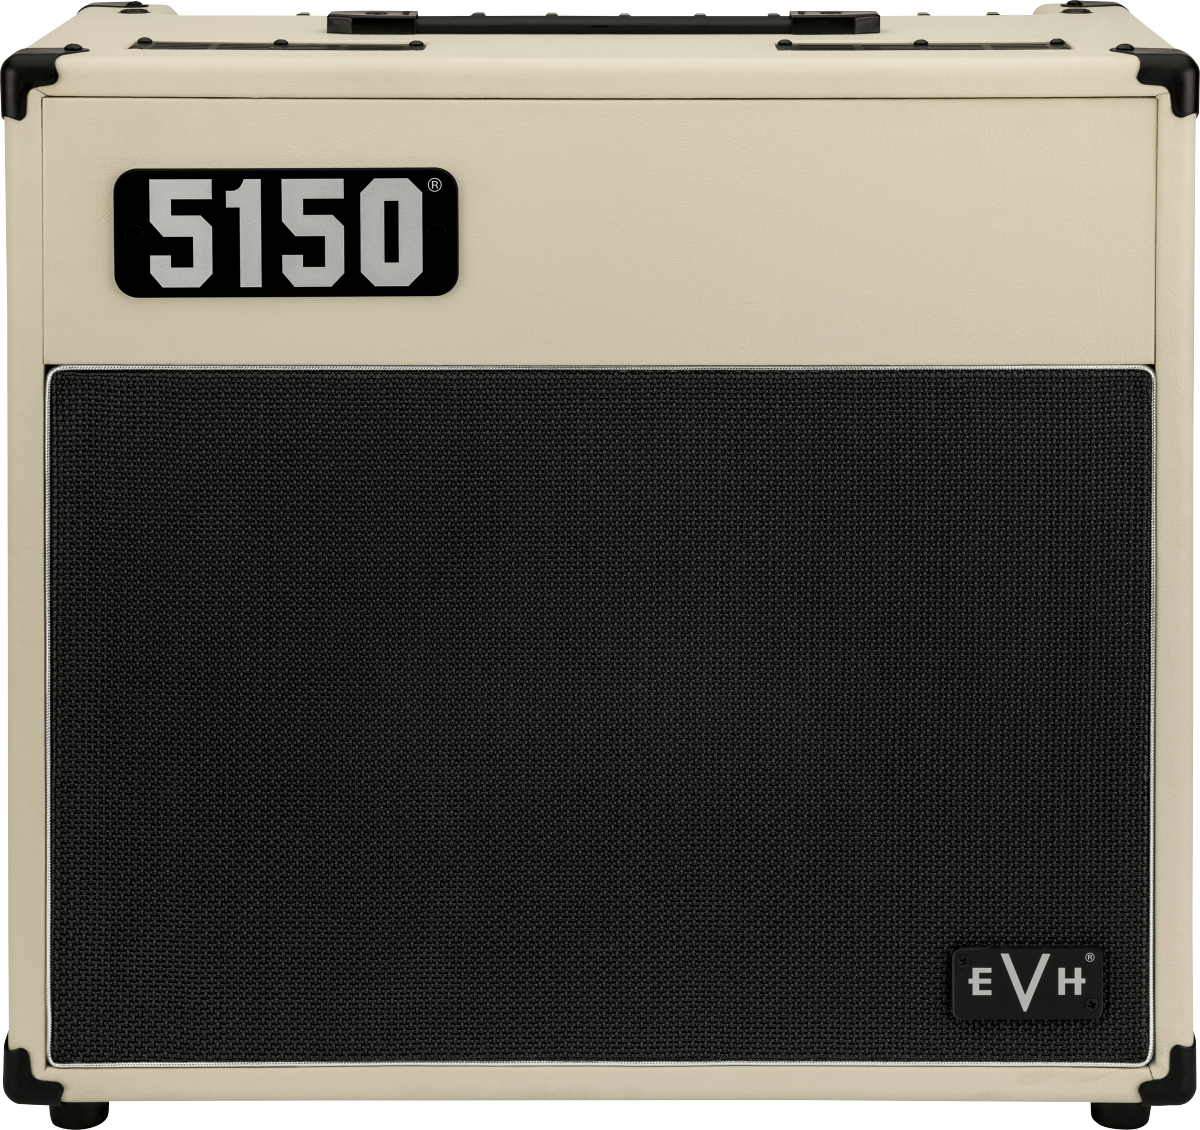 Evh 5150 Iconic Series Combo Ivory 15w 1x10 - Electric guitar combo amp - Main picture